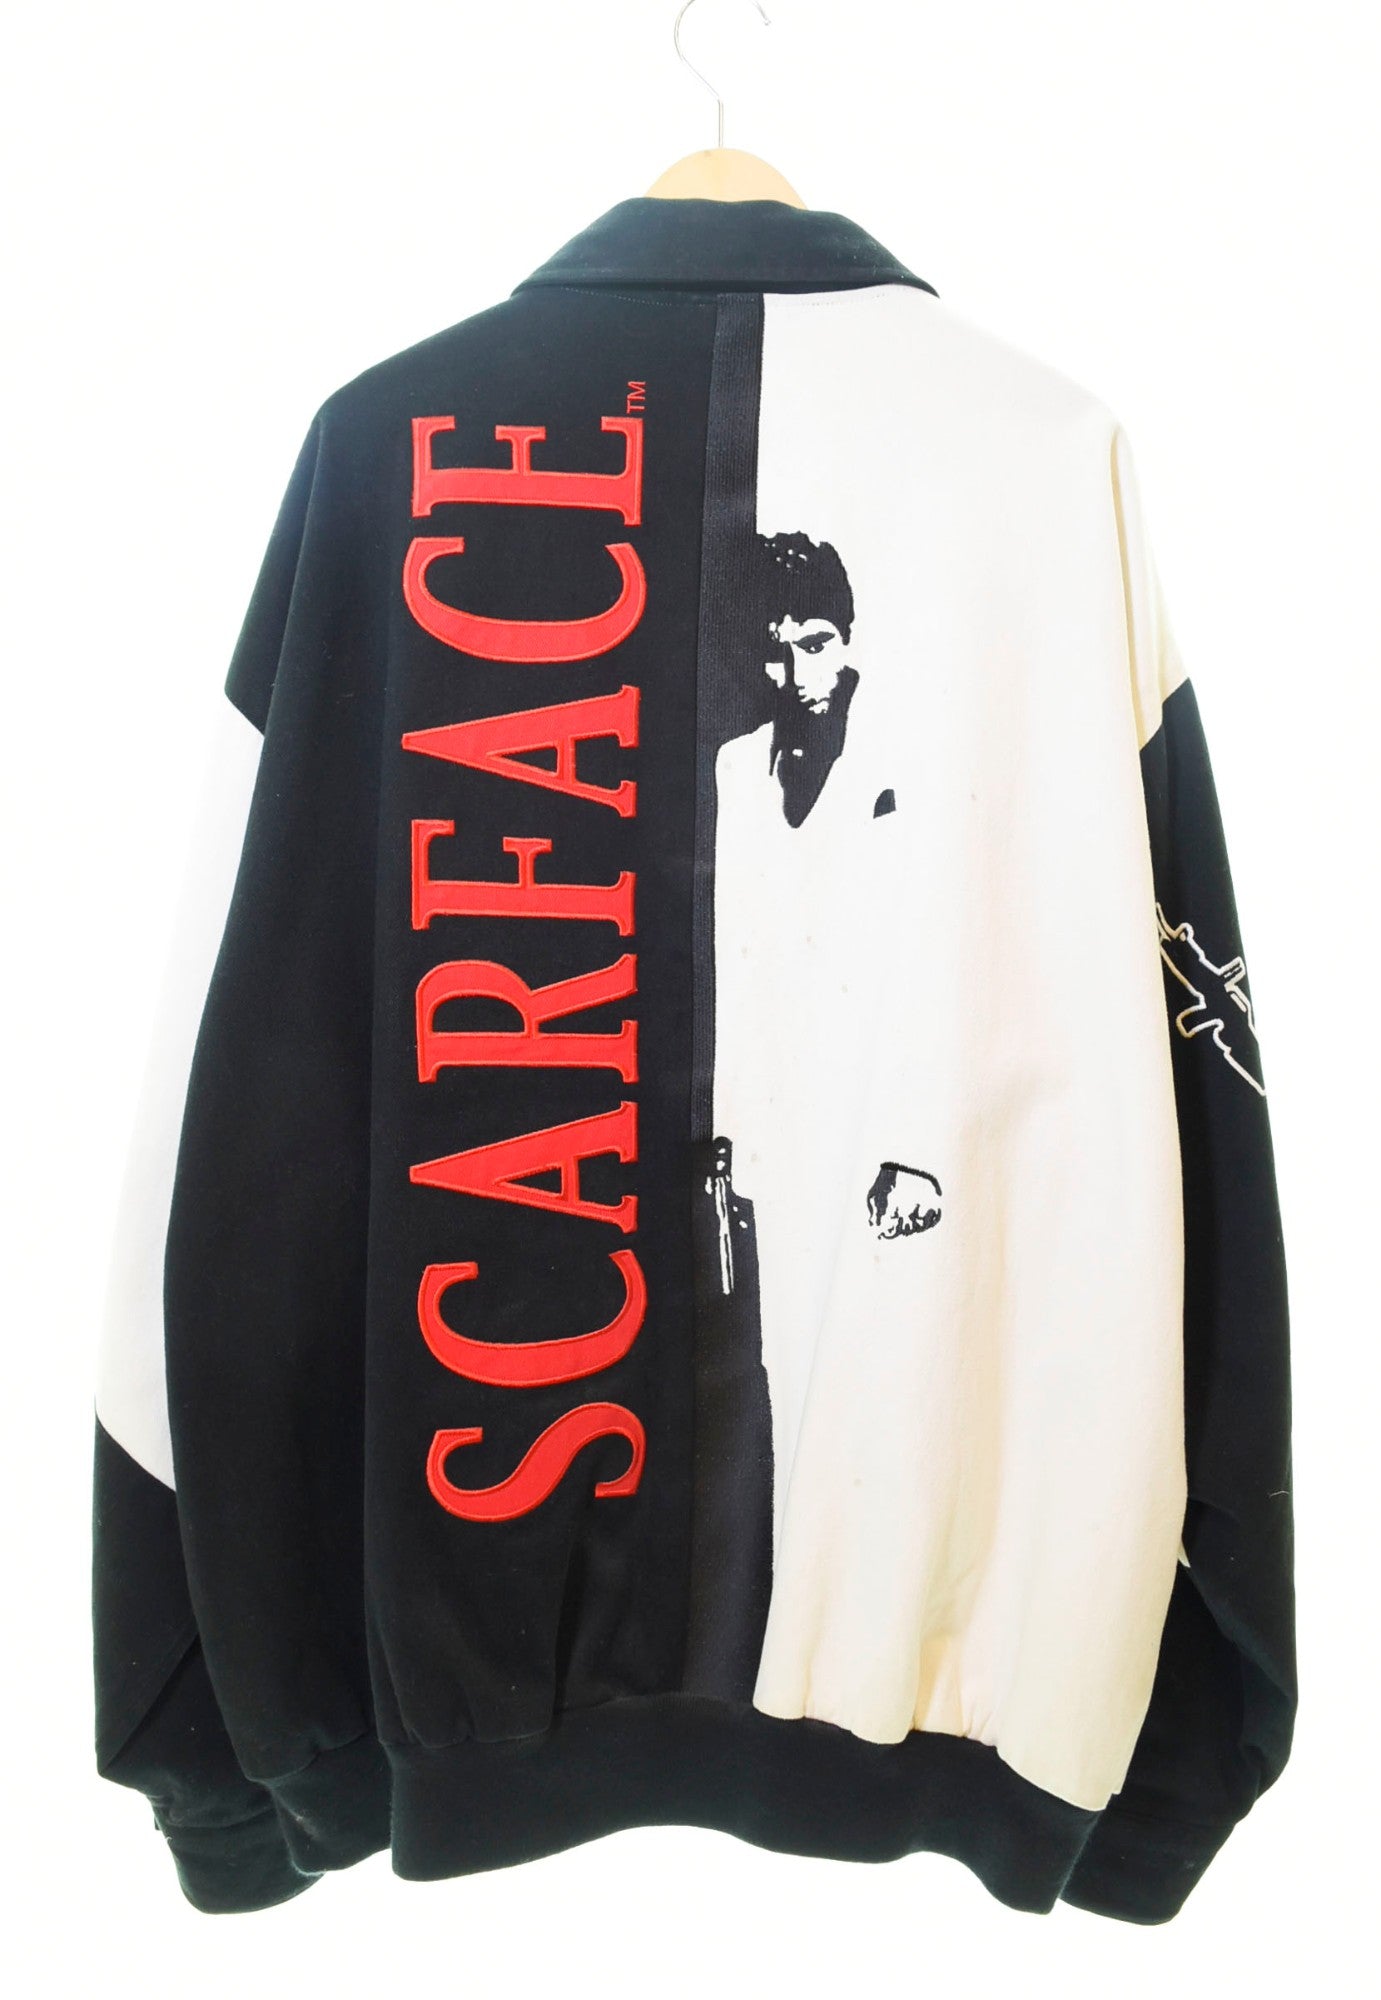 JH DESIGN ジェーエイチデザイン 90s SCARFACE Racing Jacket 